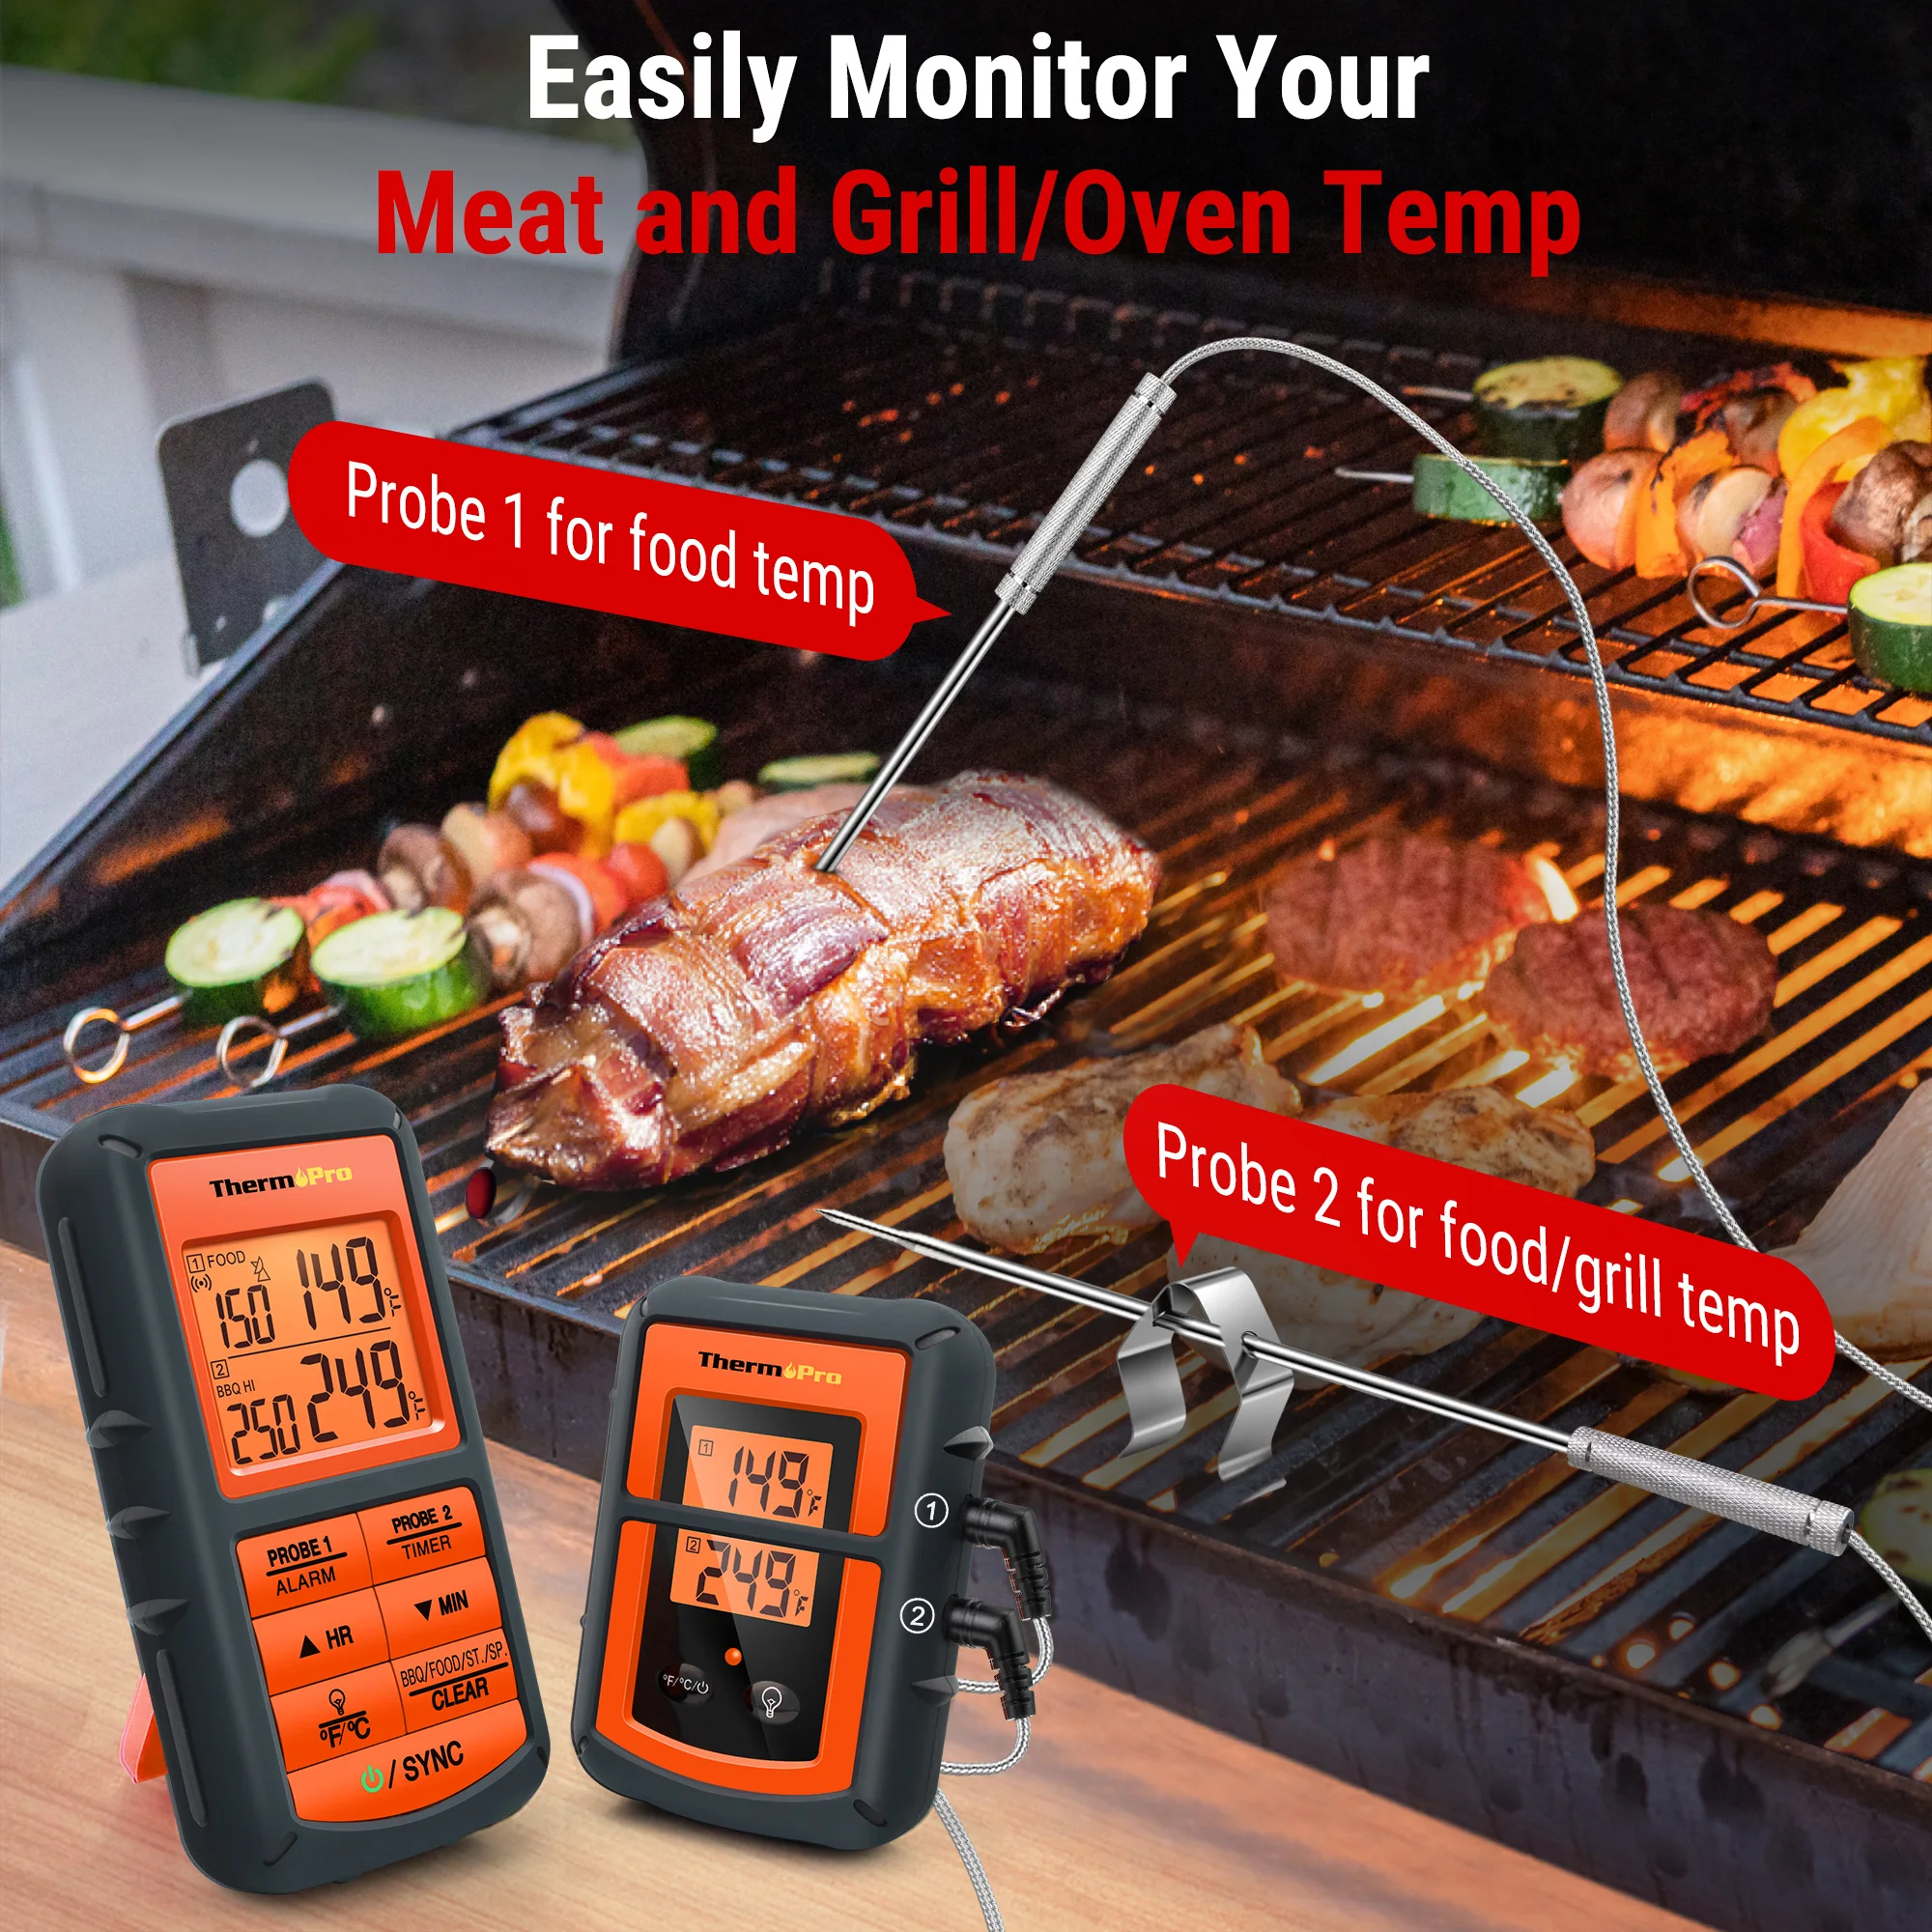 https://ae01.alicdn.com/kf/H4e0afff3f3344c2fa6c1d3d745af3629V/ThermoPro-TP08C-150M-Wireless-Remote-Digital-Cooking-Thermometer-Dual-Probe-Meat-Thermometer-for-BBQ-Smoker-Grill.jpg